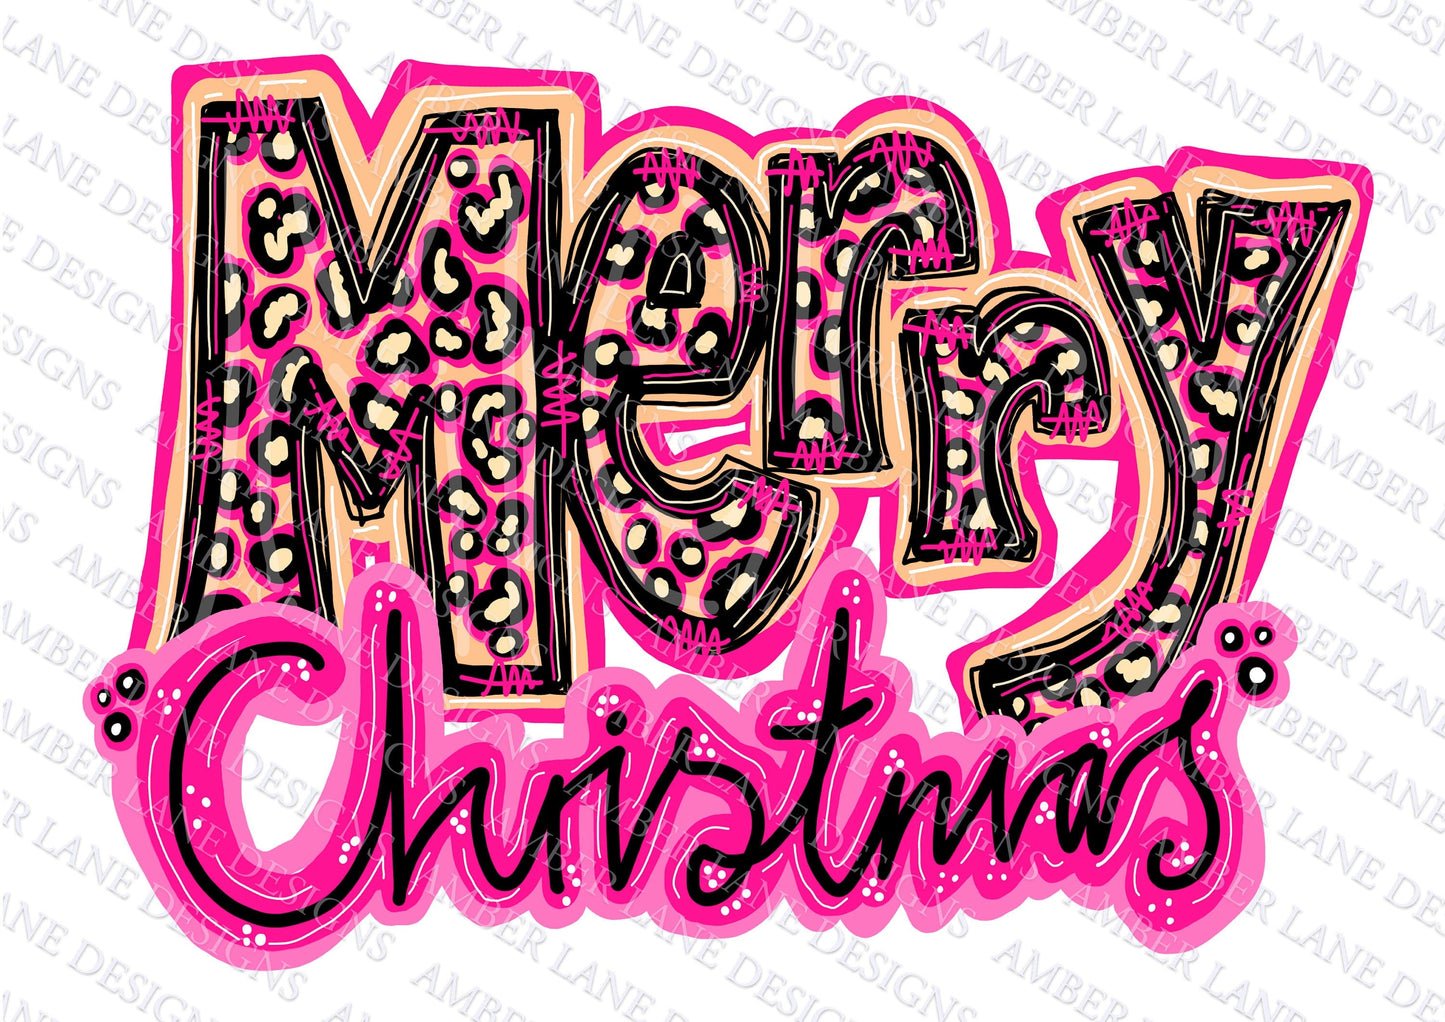 Merry Christmas Pink and Leopard,hand lettered png digital file